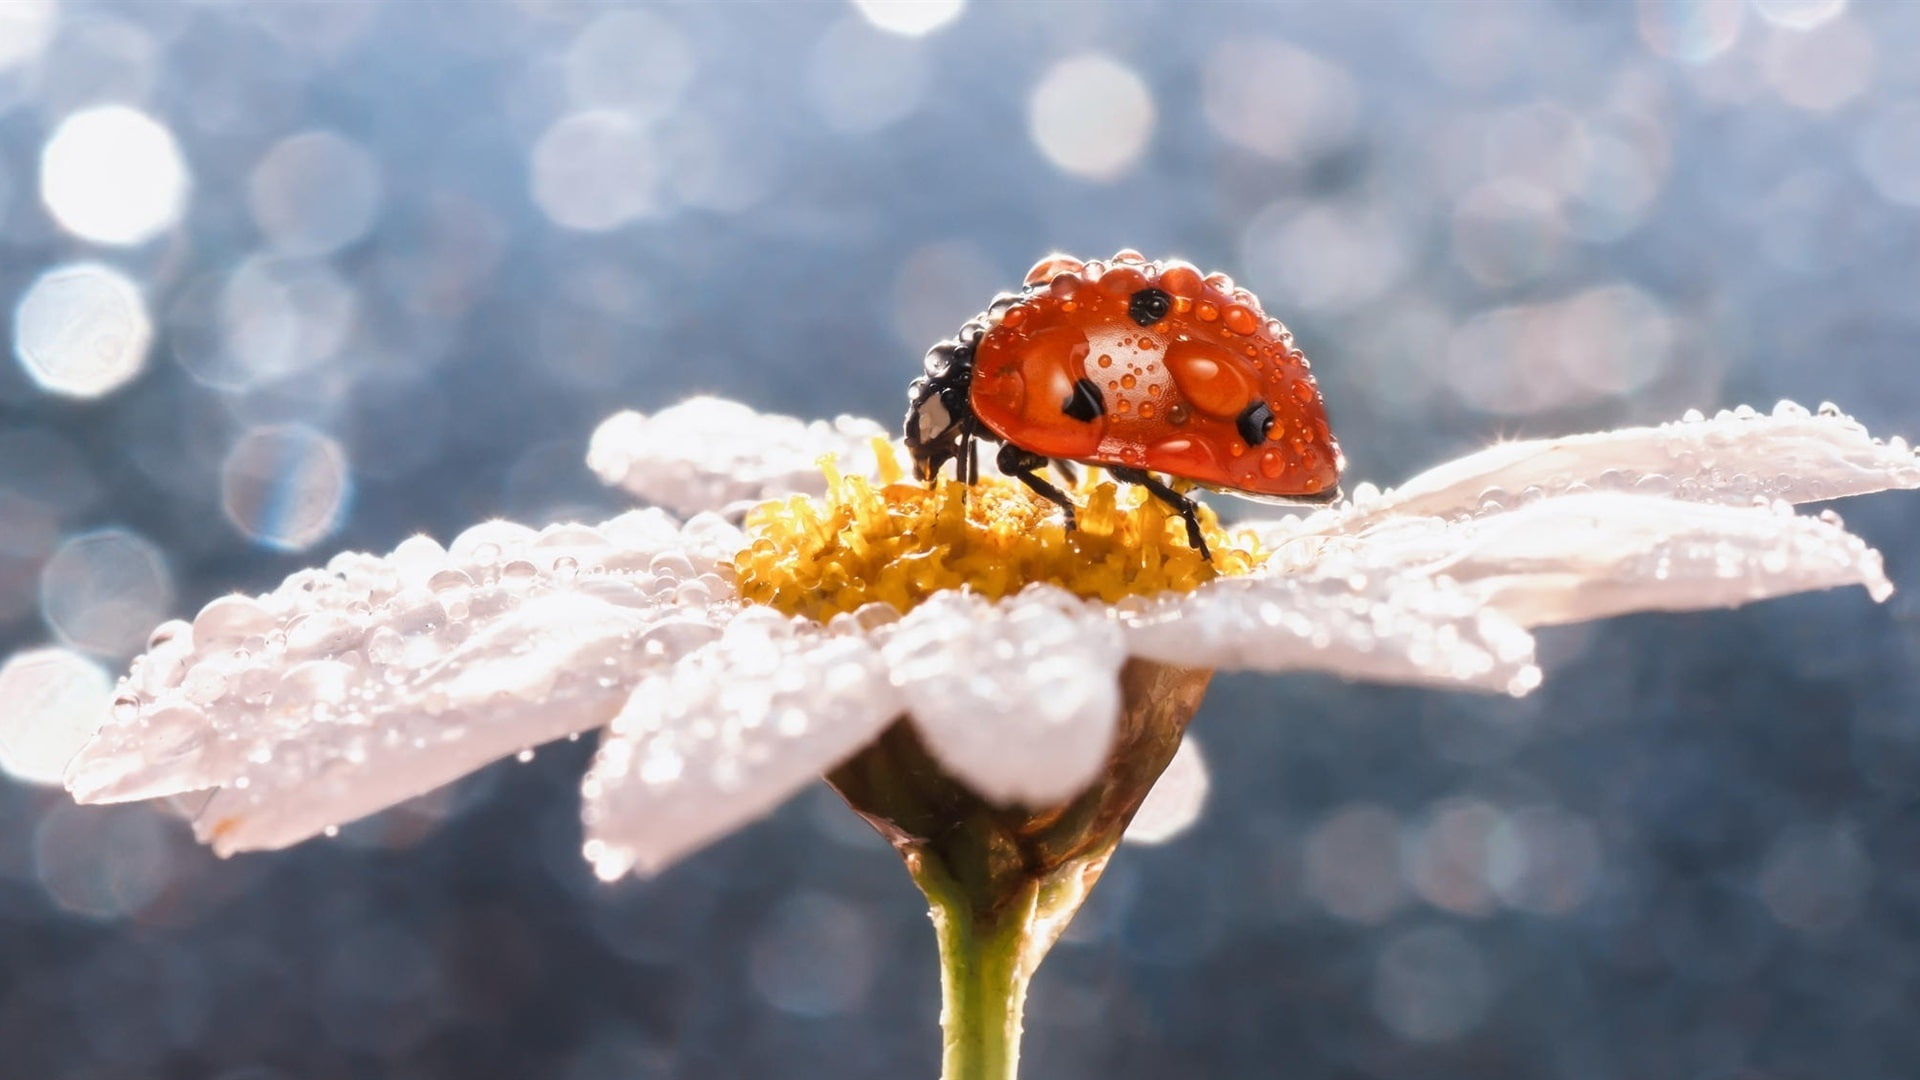 Daisy flower, insect, ladybug, water drops, ladybug and white flower